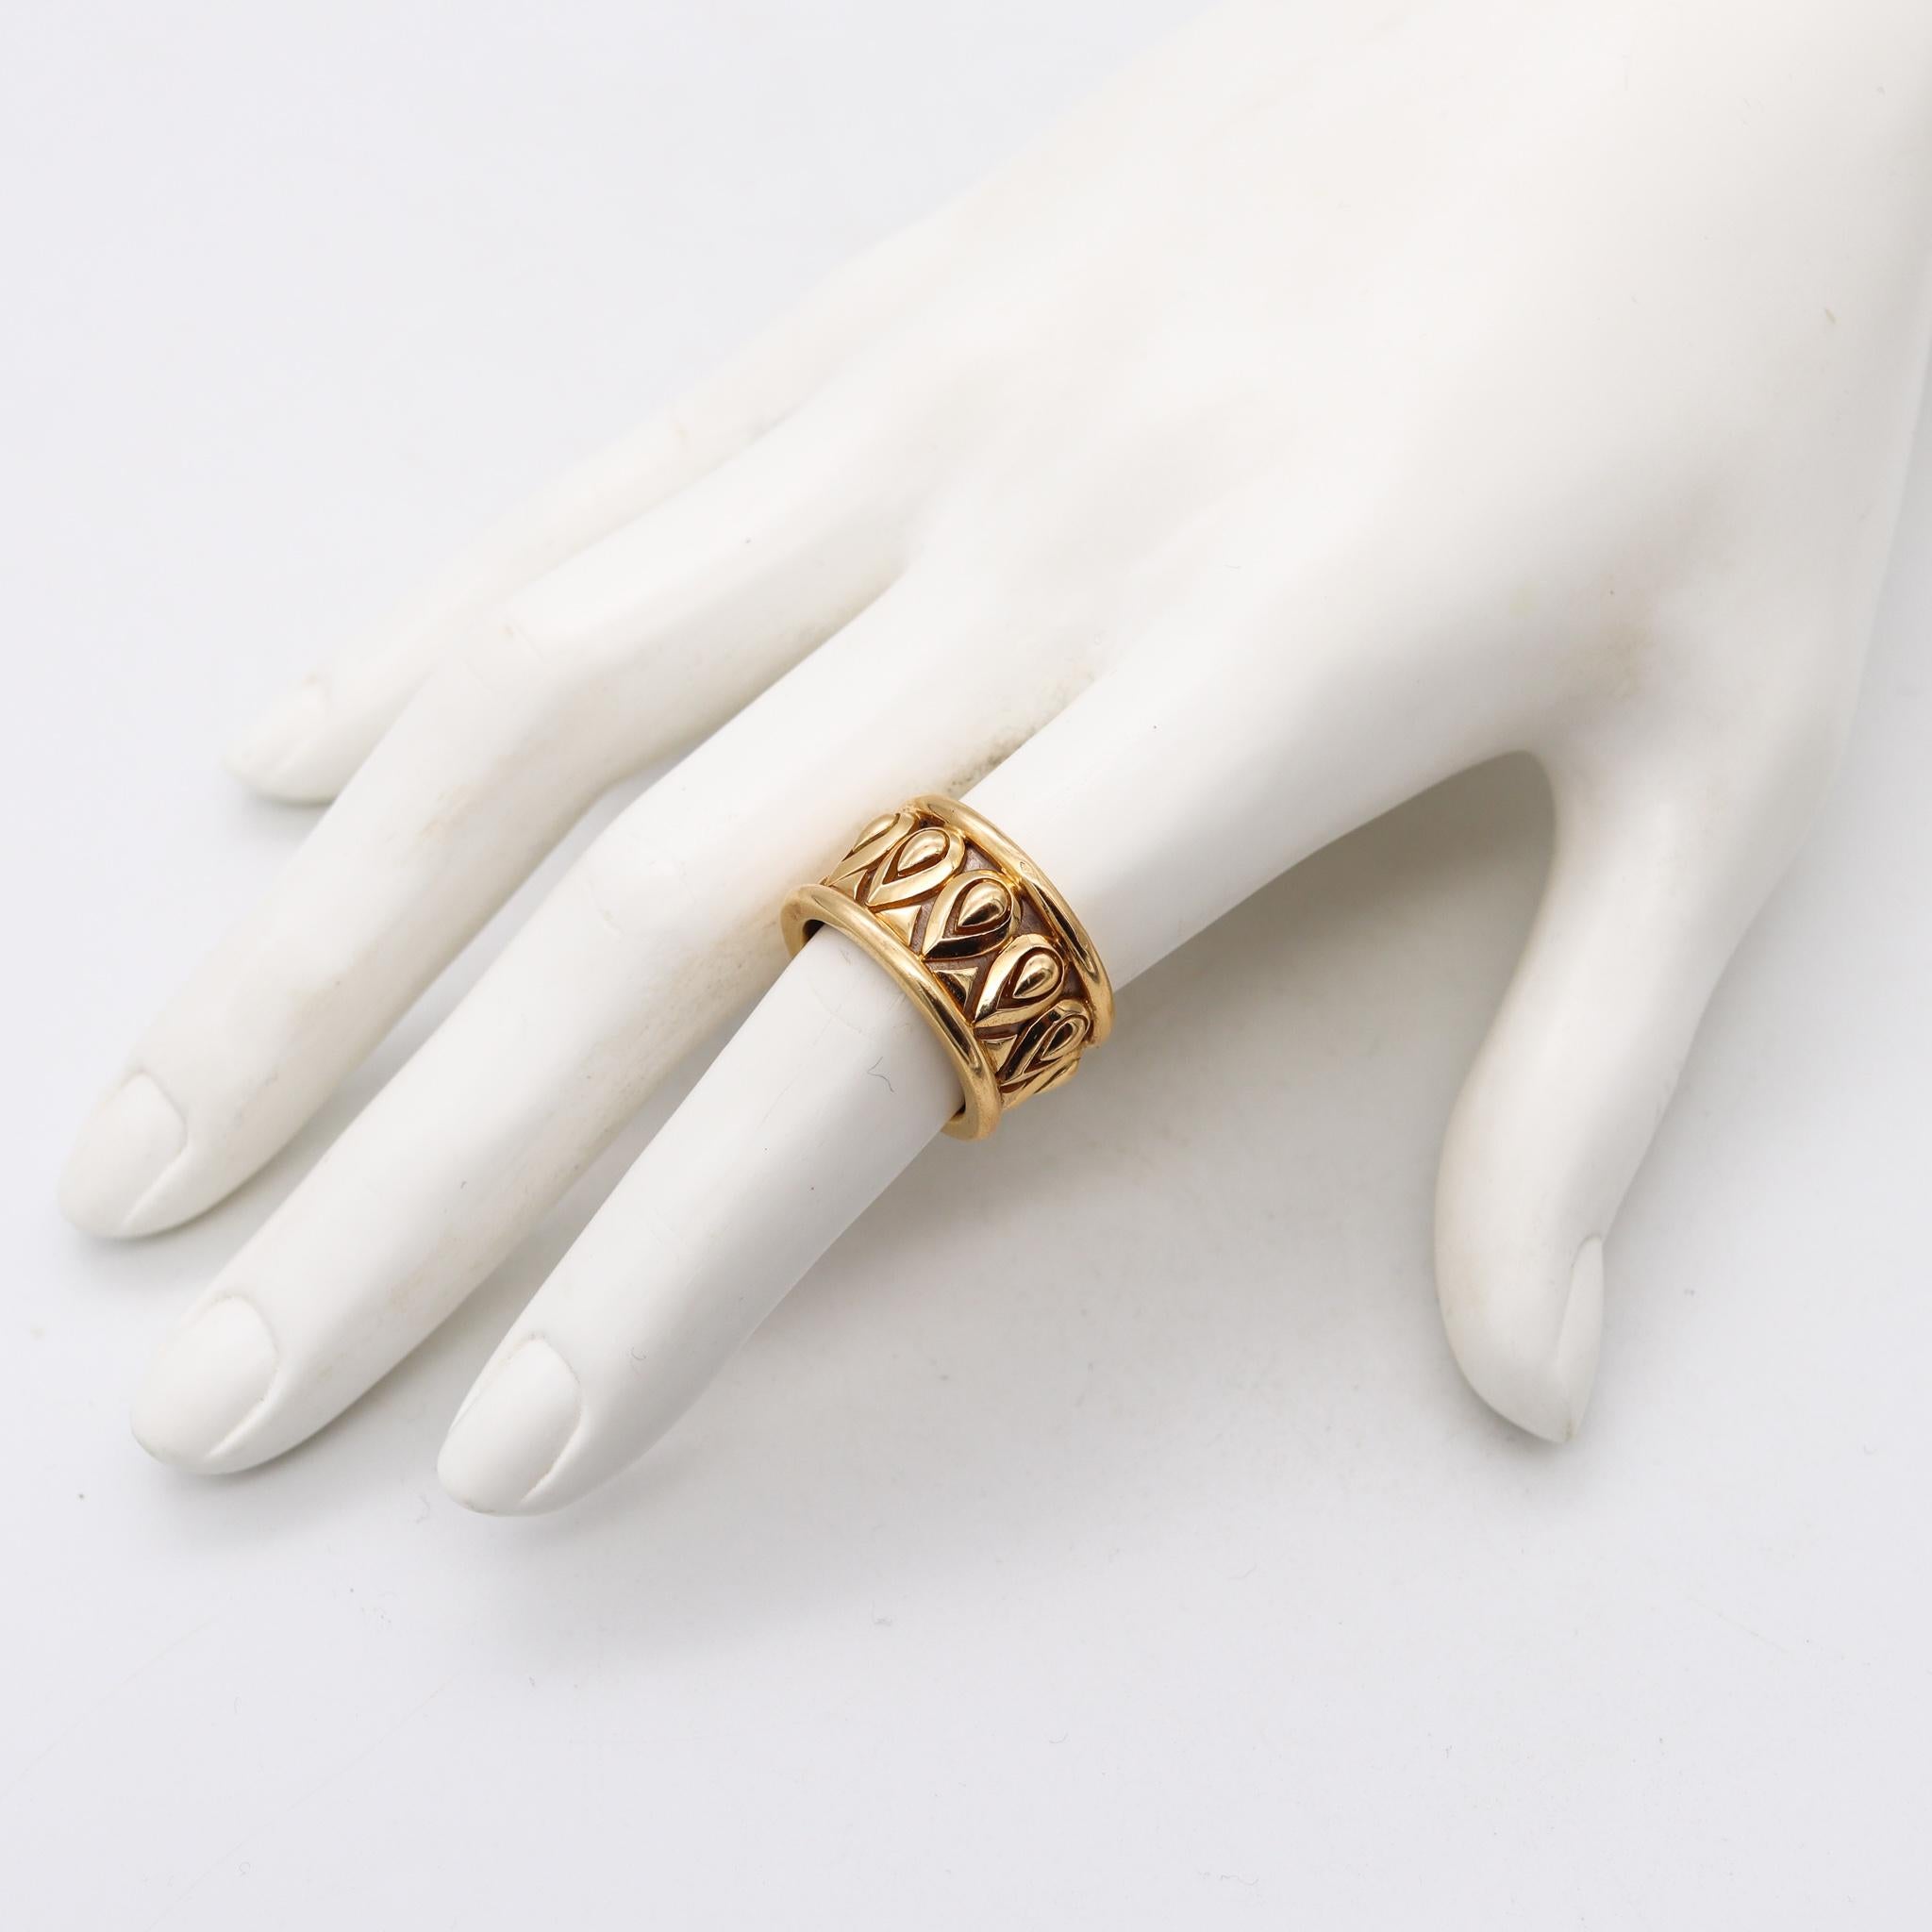 Women's or Men's Cartier Paris Rare Tanjore Band Ring in Two Tones of 18Kt Gold